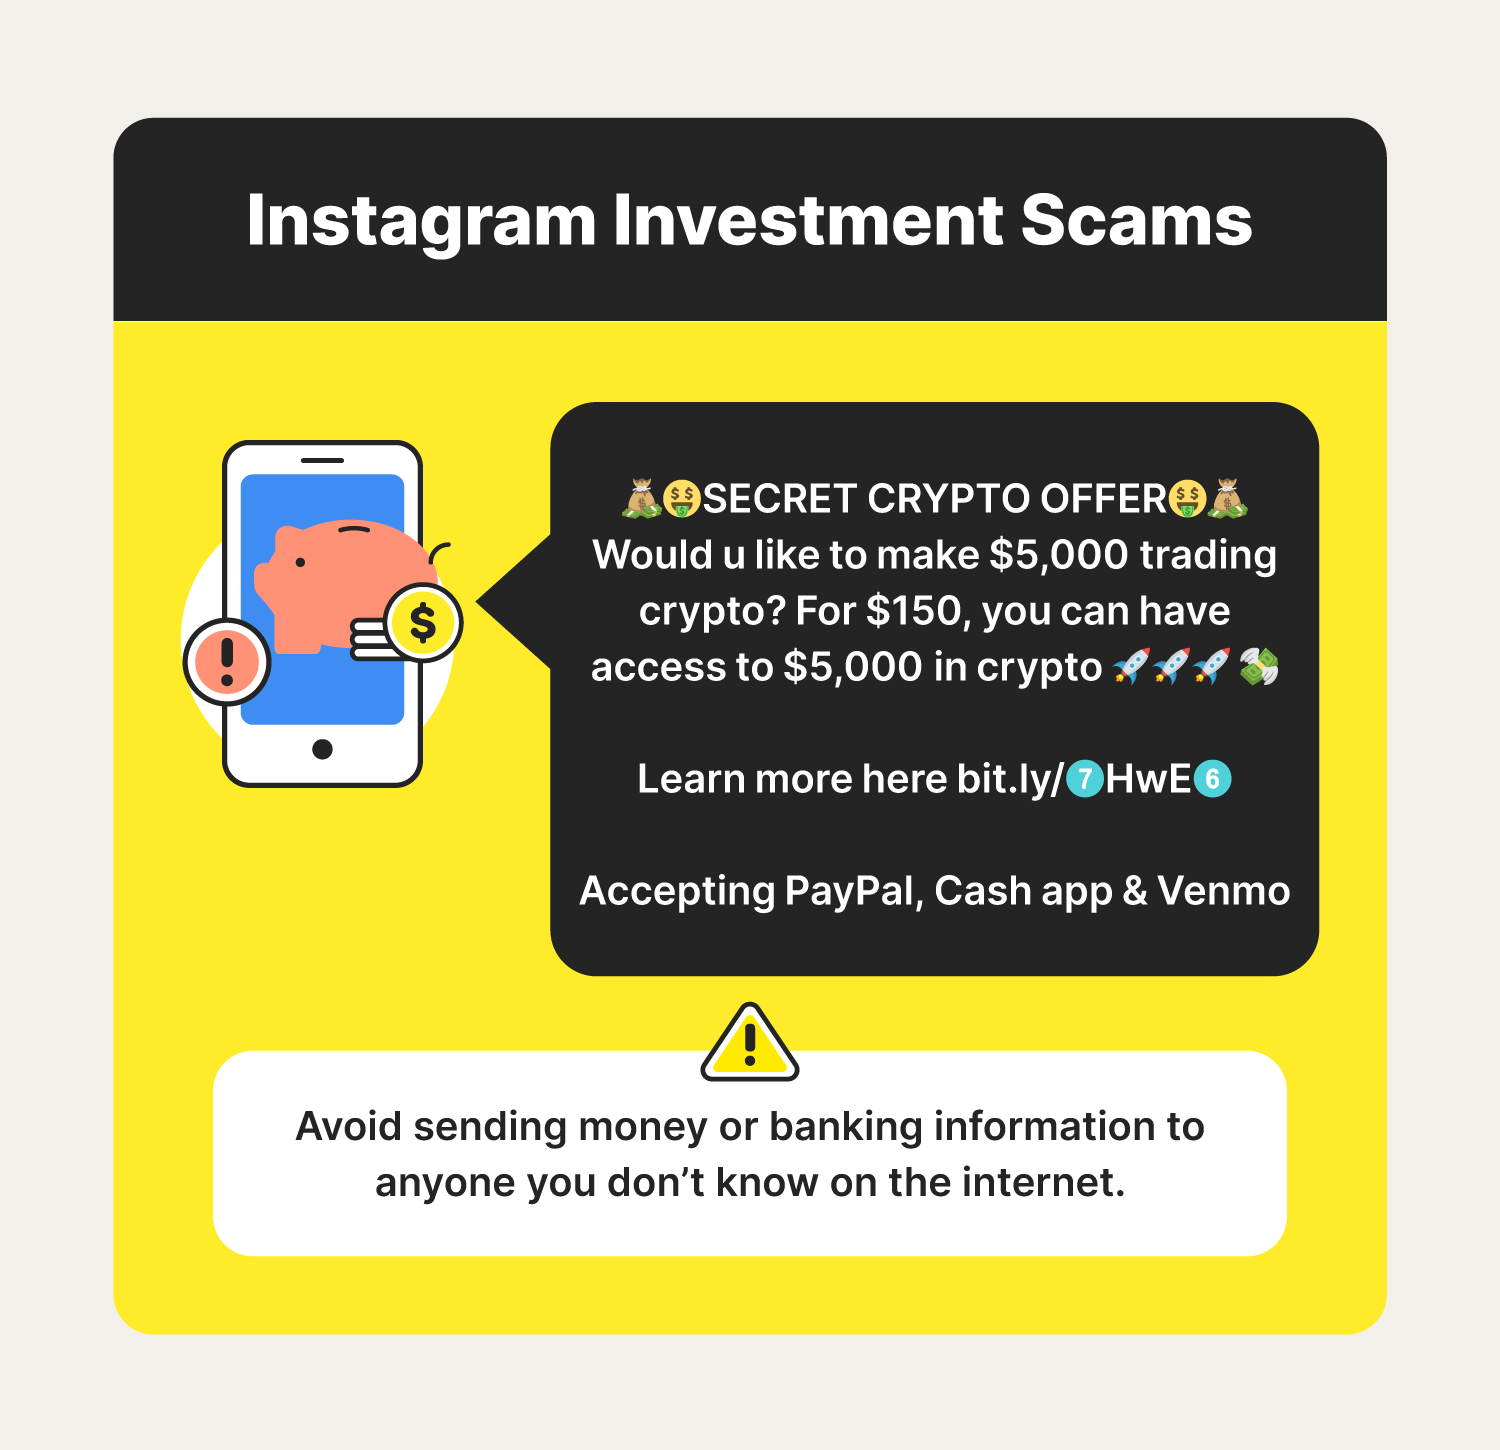 A graphic showcases a direct message promoting a fake investment opportunity, a common Instagram scam. 